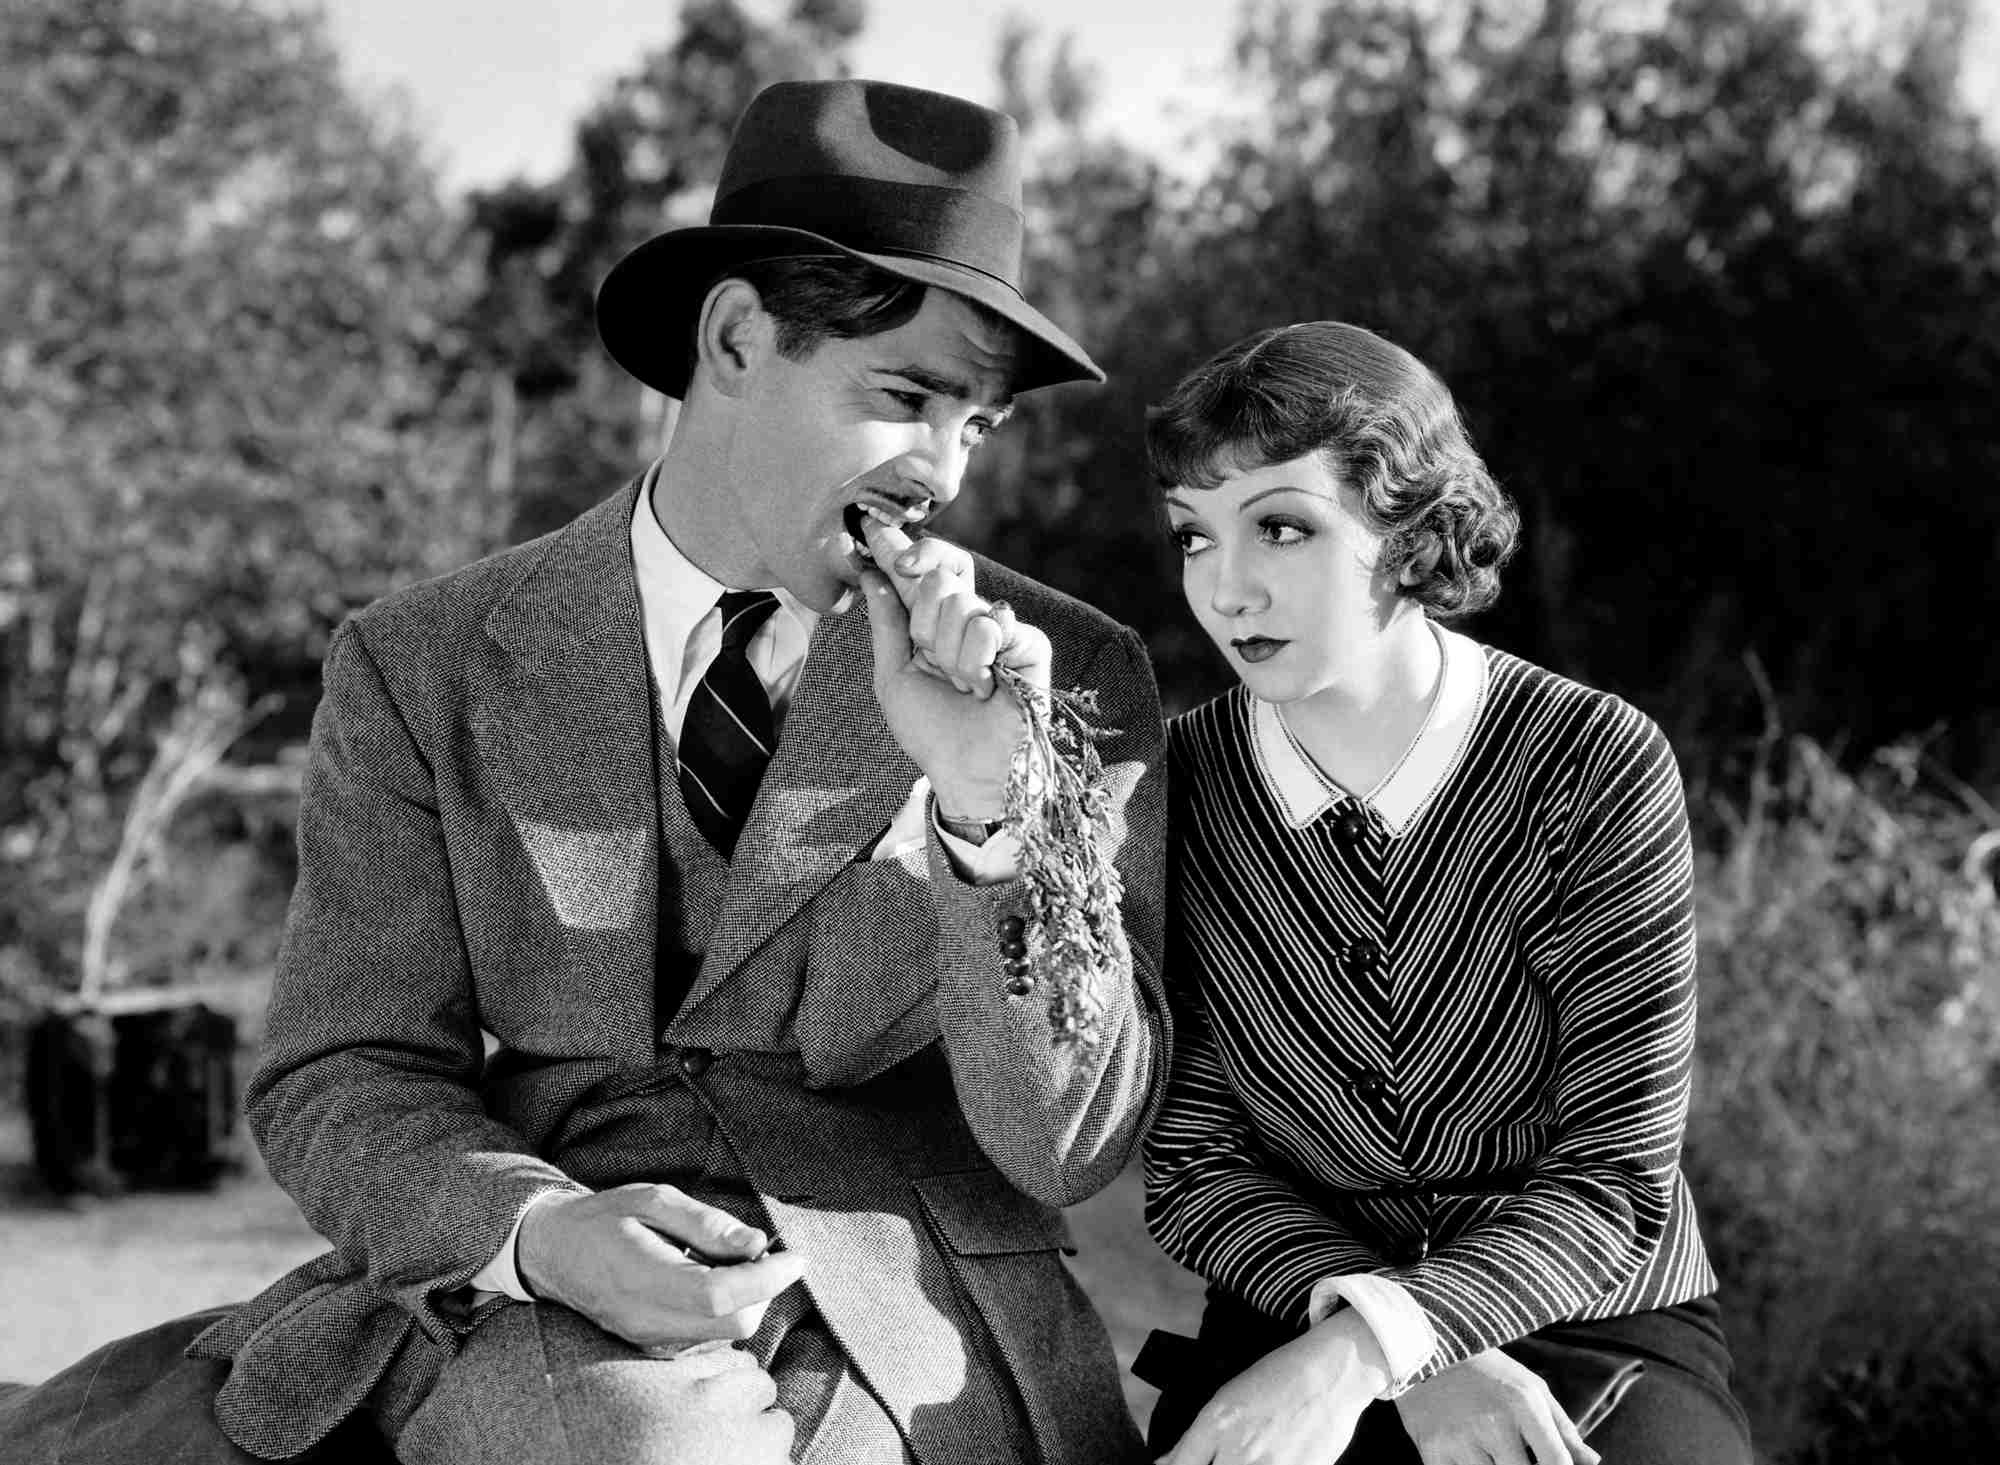 'It Happened One Night' Clark Gable as Peter Warne and Claudette Colbert as Ellie Andrews sitting next to each other in nature, with Gable chewing on a carrot